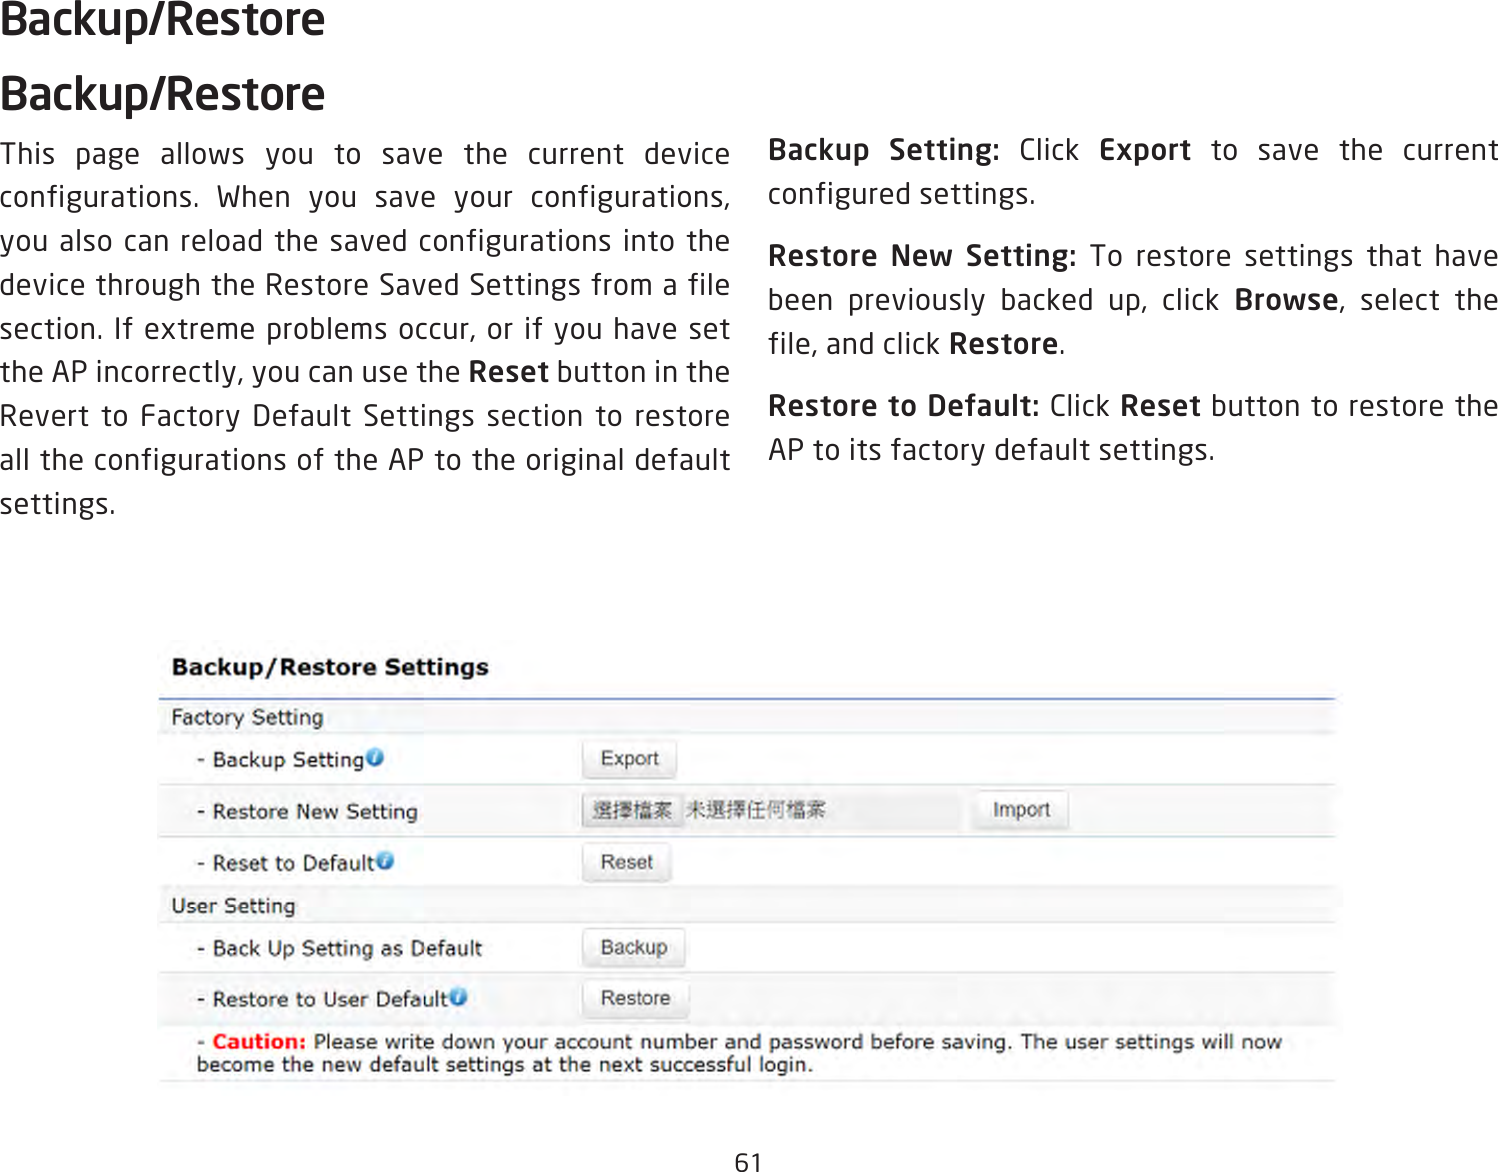 61Backup/RestoreBackup/RestoreThis page allows you to save the current device configurations. When you save your configurations, you also can reload the saved configurations into the device through the Restore Saved Settings from a file section. If extreme problems occur, or if you have set the AP incorrectly, you can use the Reset button in the Revert to Factory Default Settings section to restore all the configurations of the AP to the original default settings.Backup Setting: Click Export to save the current configured settings.Restore New Setting: To restore settings that have been previously backed up, click Browse, select the file, and click Restore.Restore to Default: Click Reset button to restore the AP to its factory default settings.